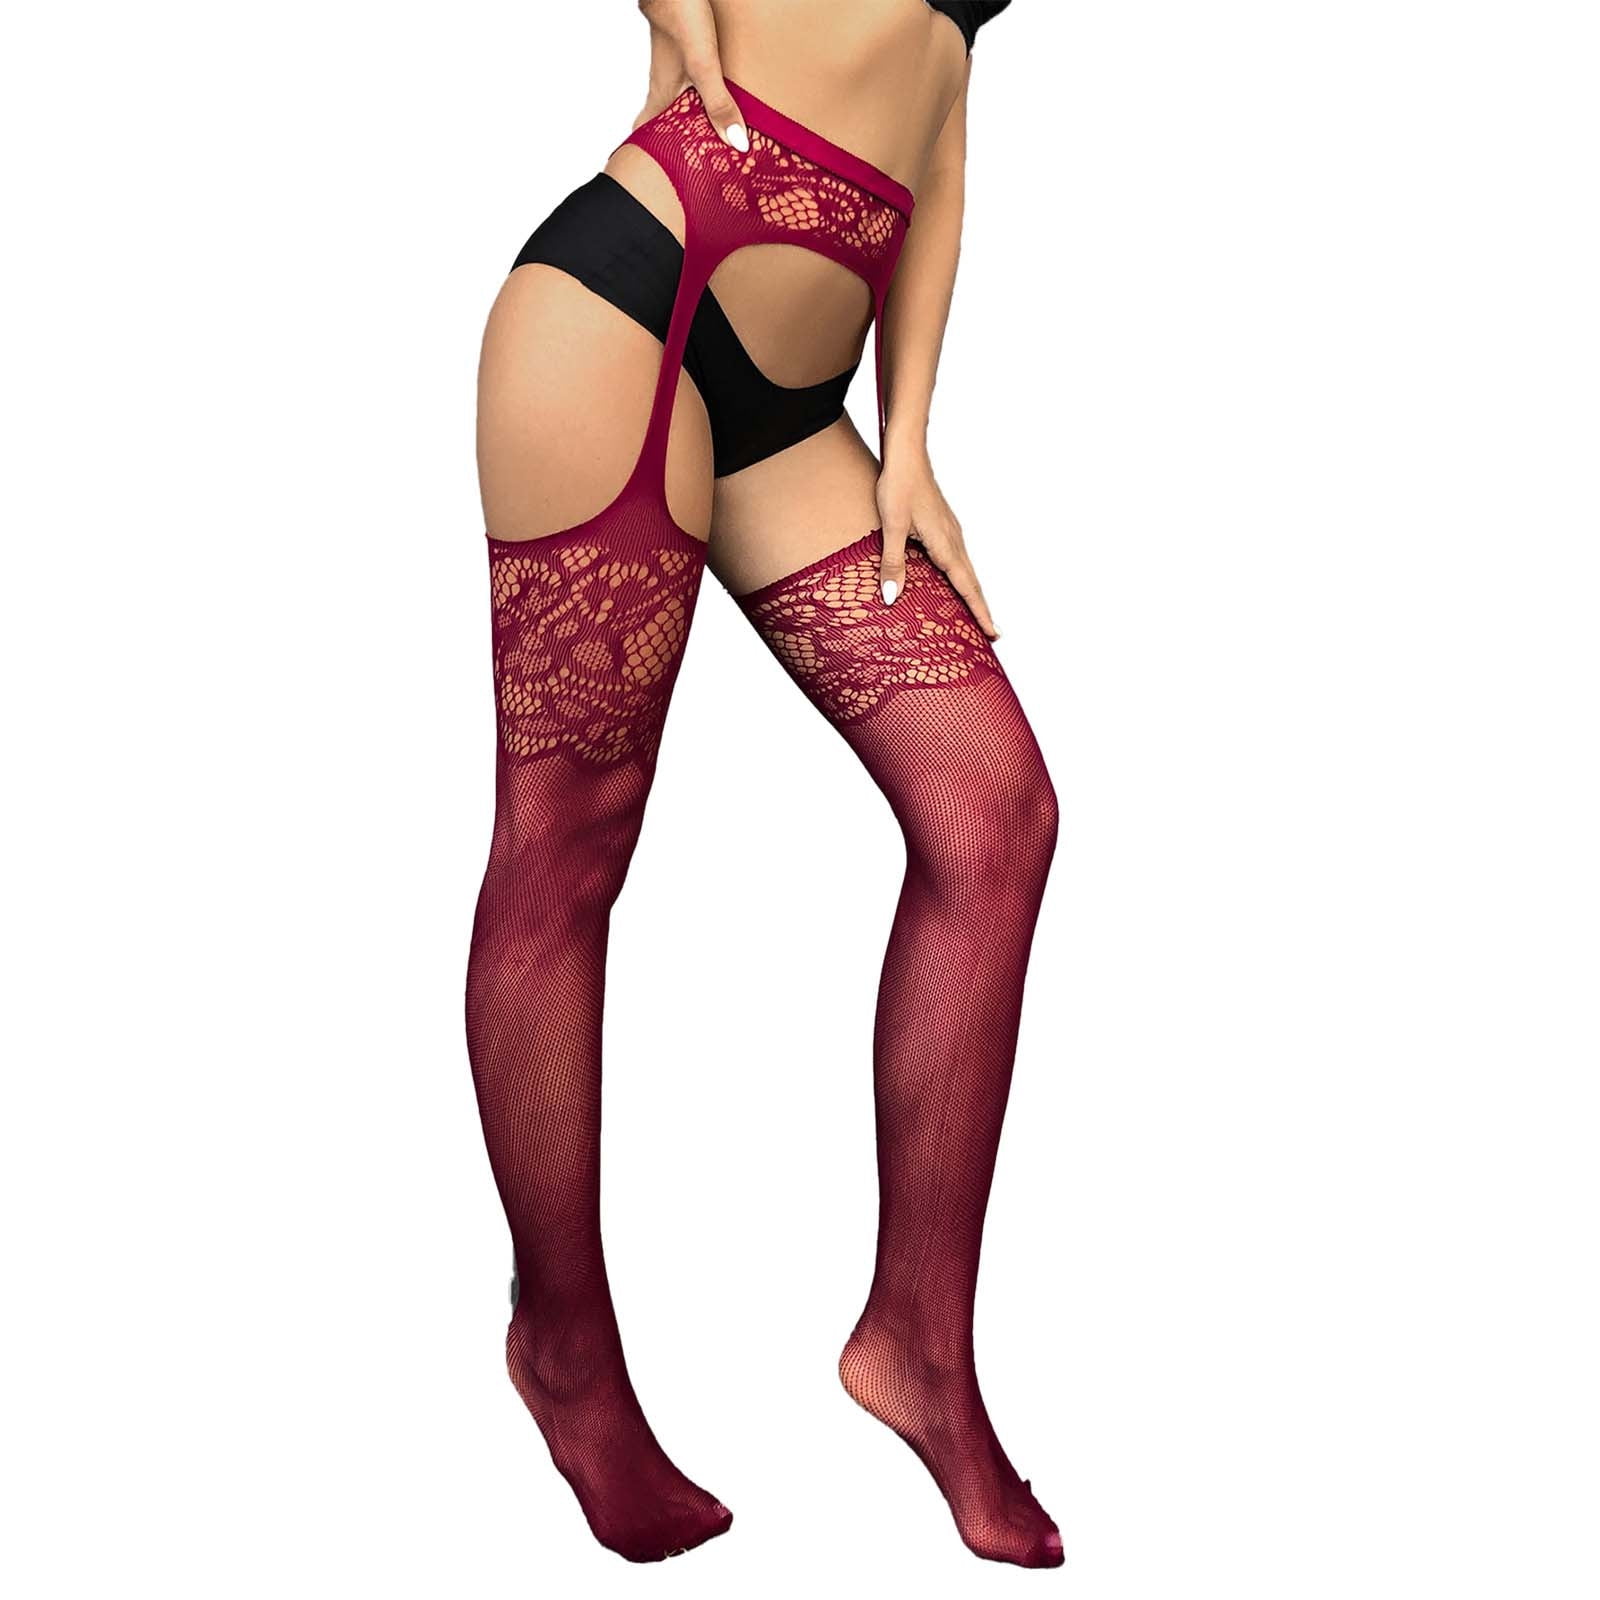 GWAABD Couple Dress for Husband and Wife Party Wear Thigh High Stockings Lingerie Lace Suspender Stockings Tights High Waist Tights for Women Girls  picture pic